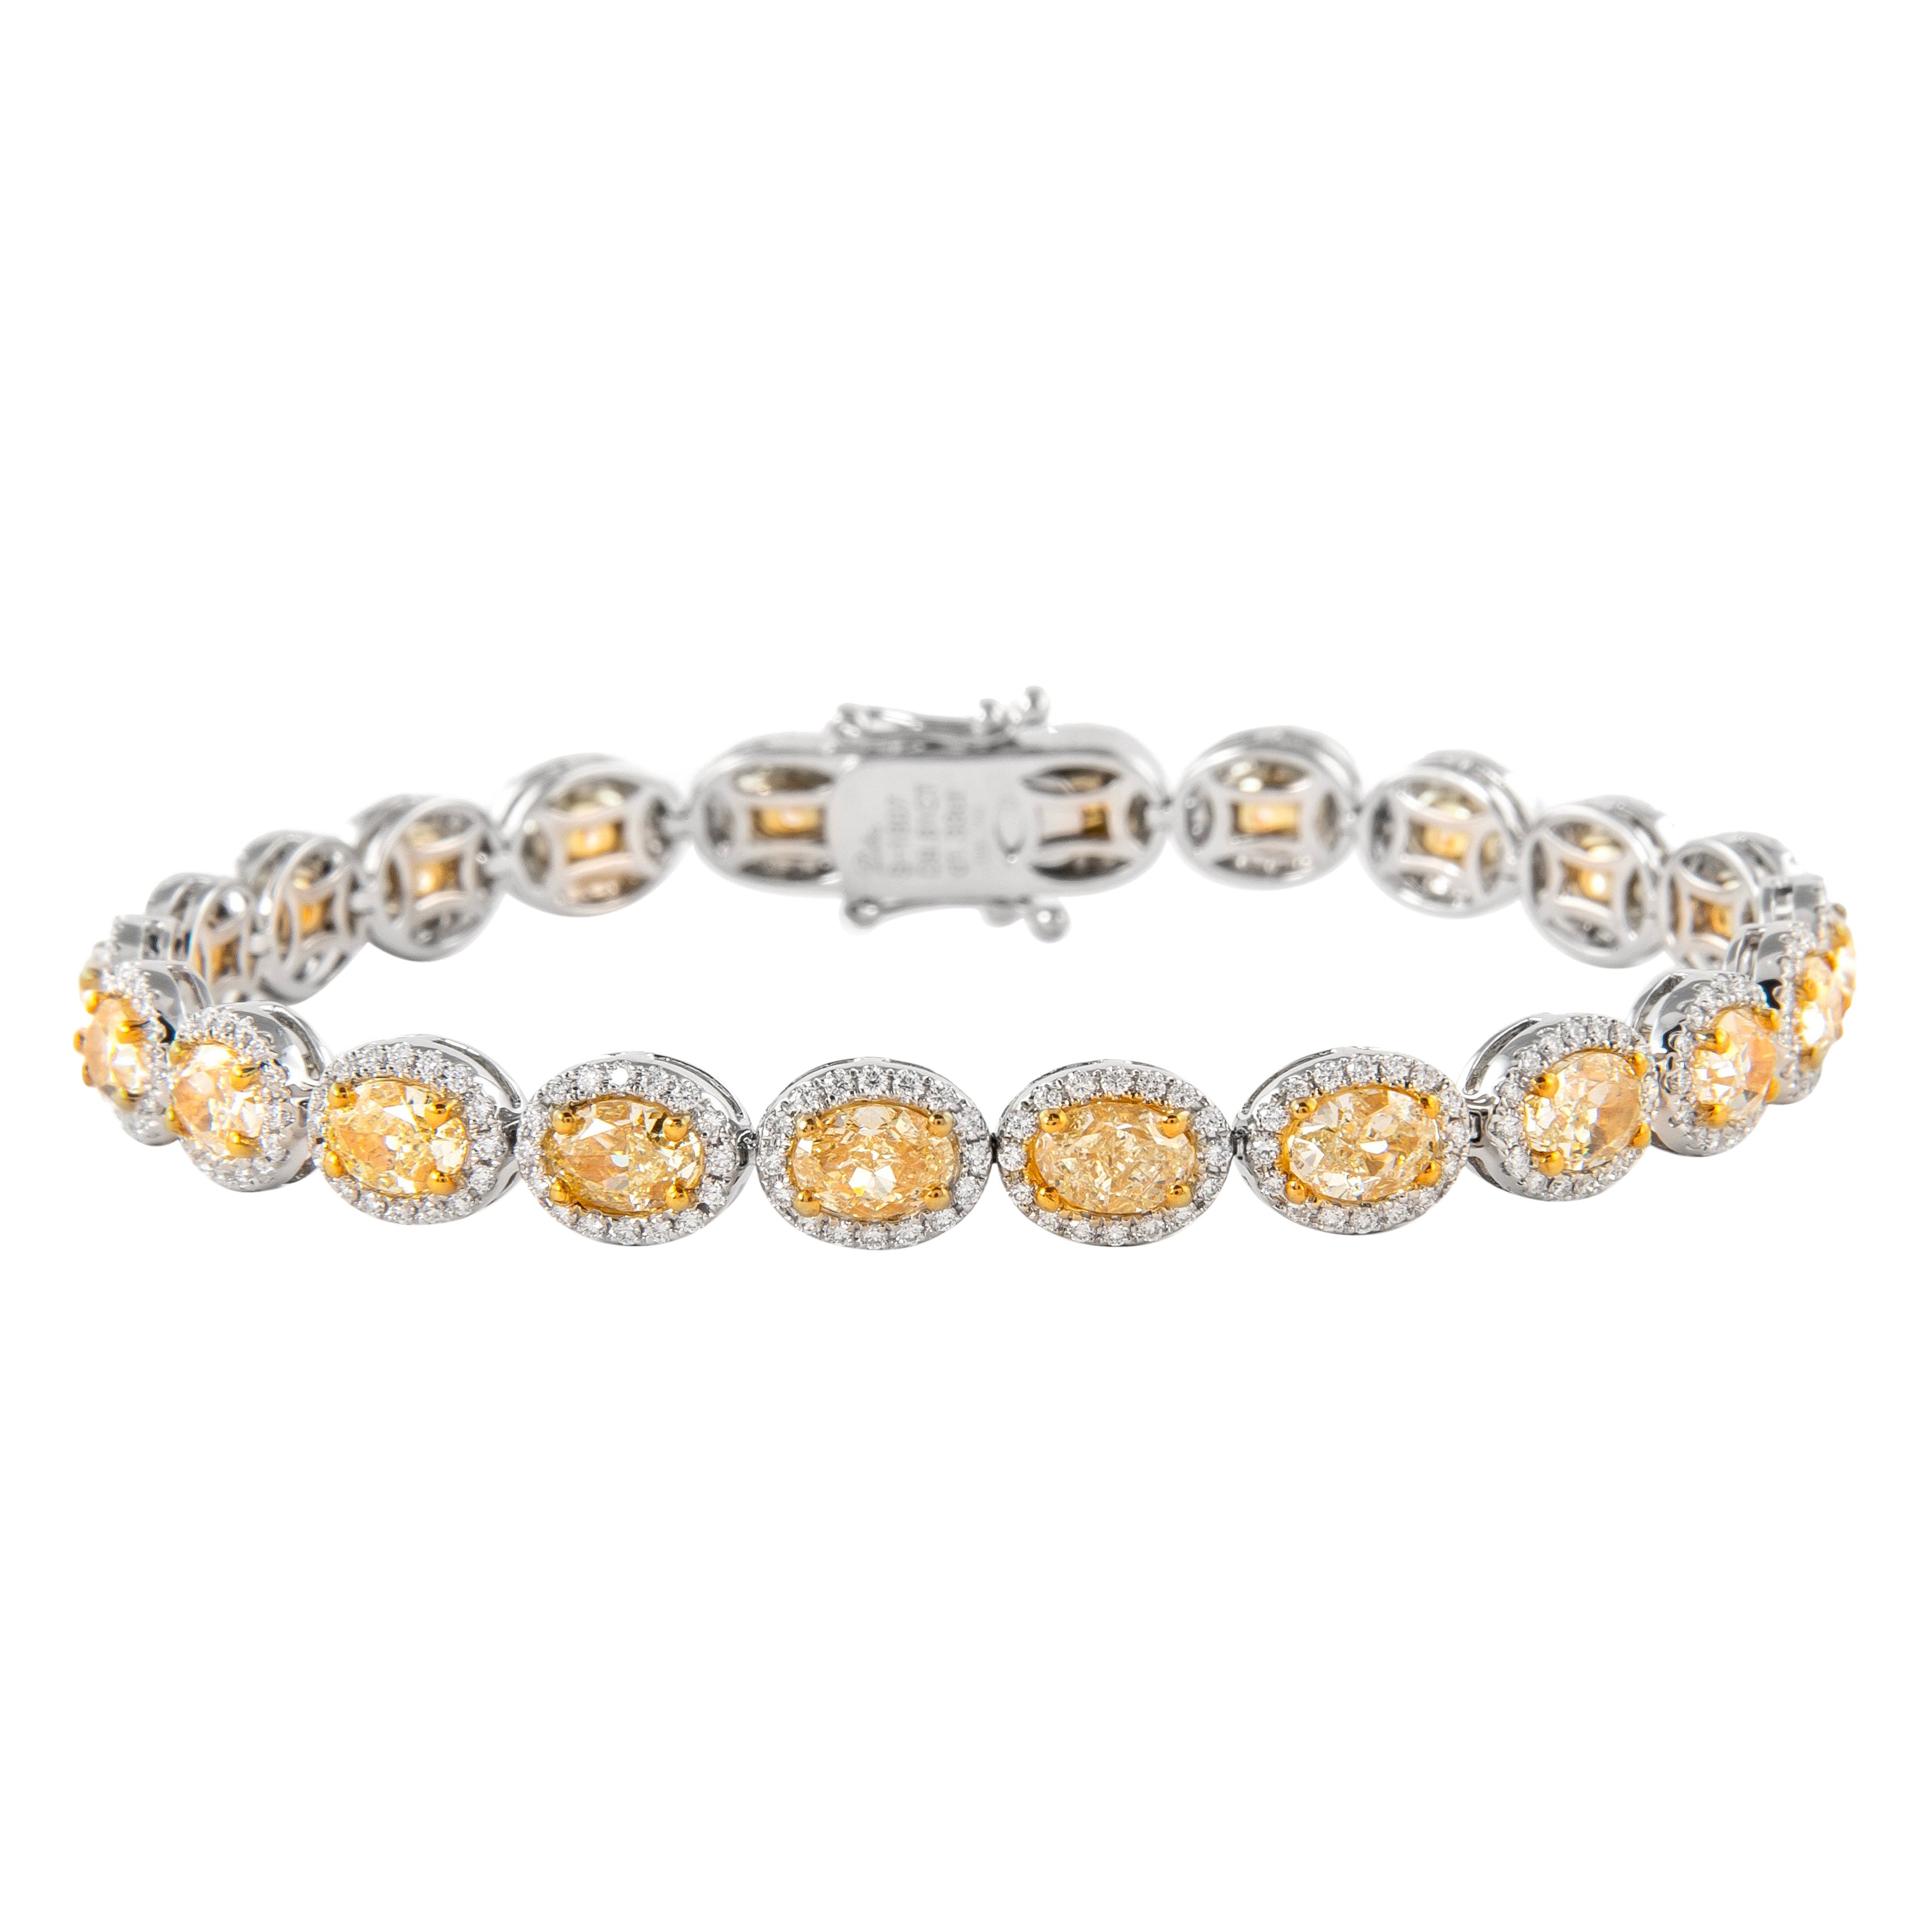 Alexander Beverly Hills 11.14ct Oval Yellow Diamond Bracelet with Halo 18k For Sale